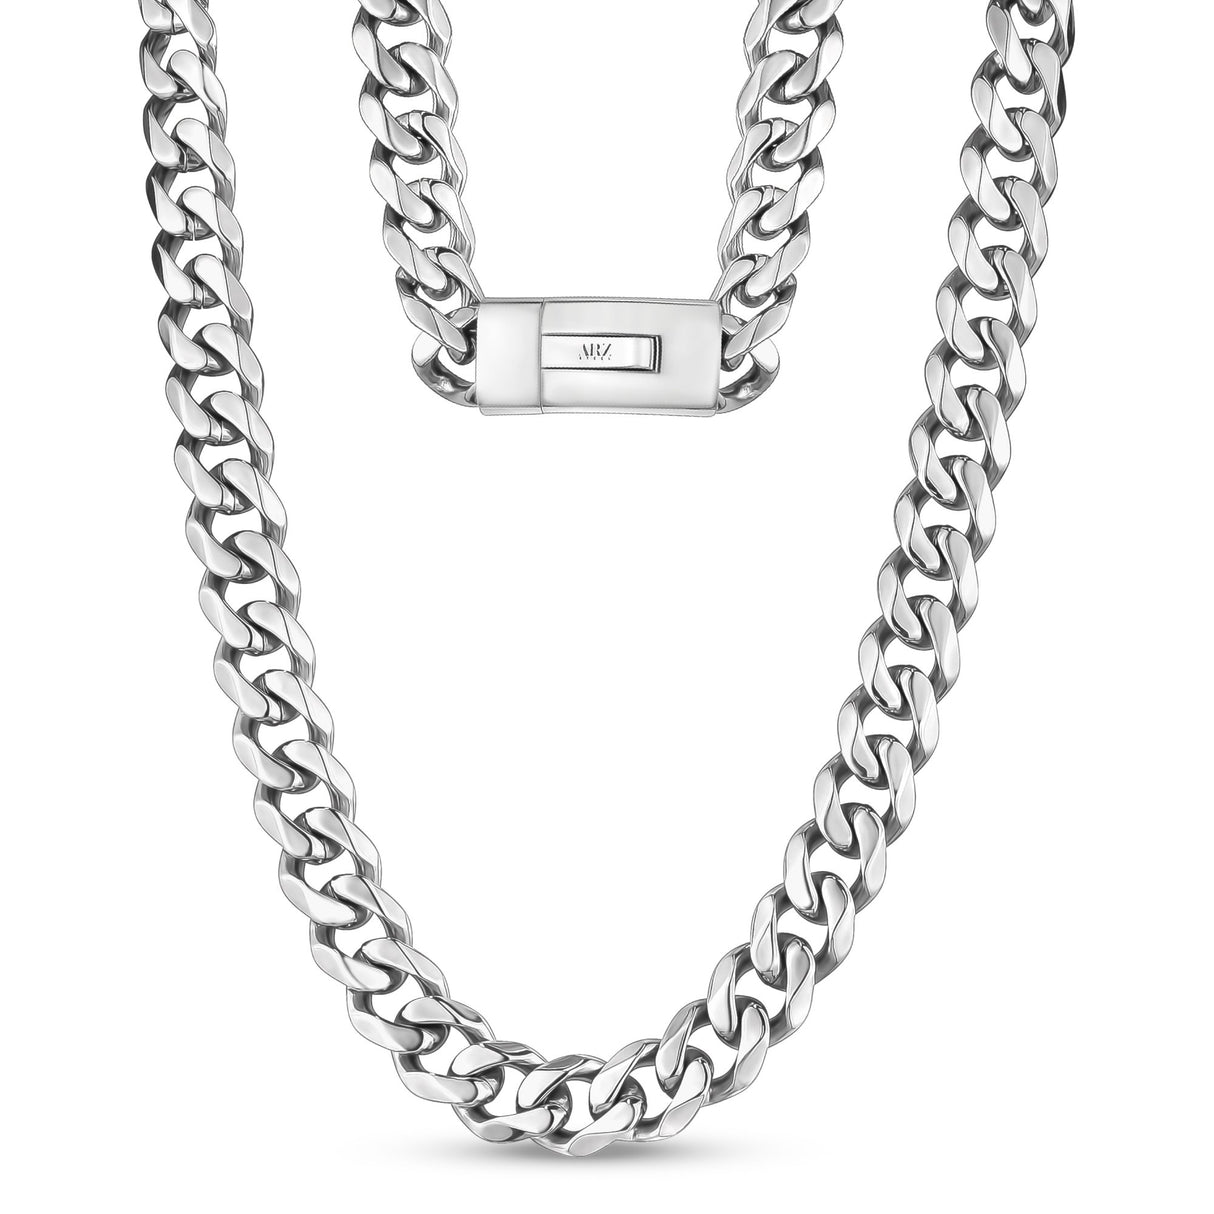 13mm Stainless Steel Cuban Link Engravable Chain Necklace 24 Inches / Silver